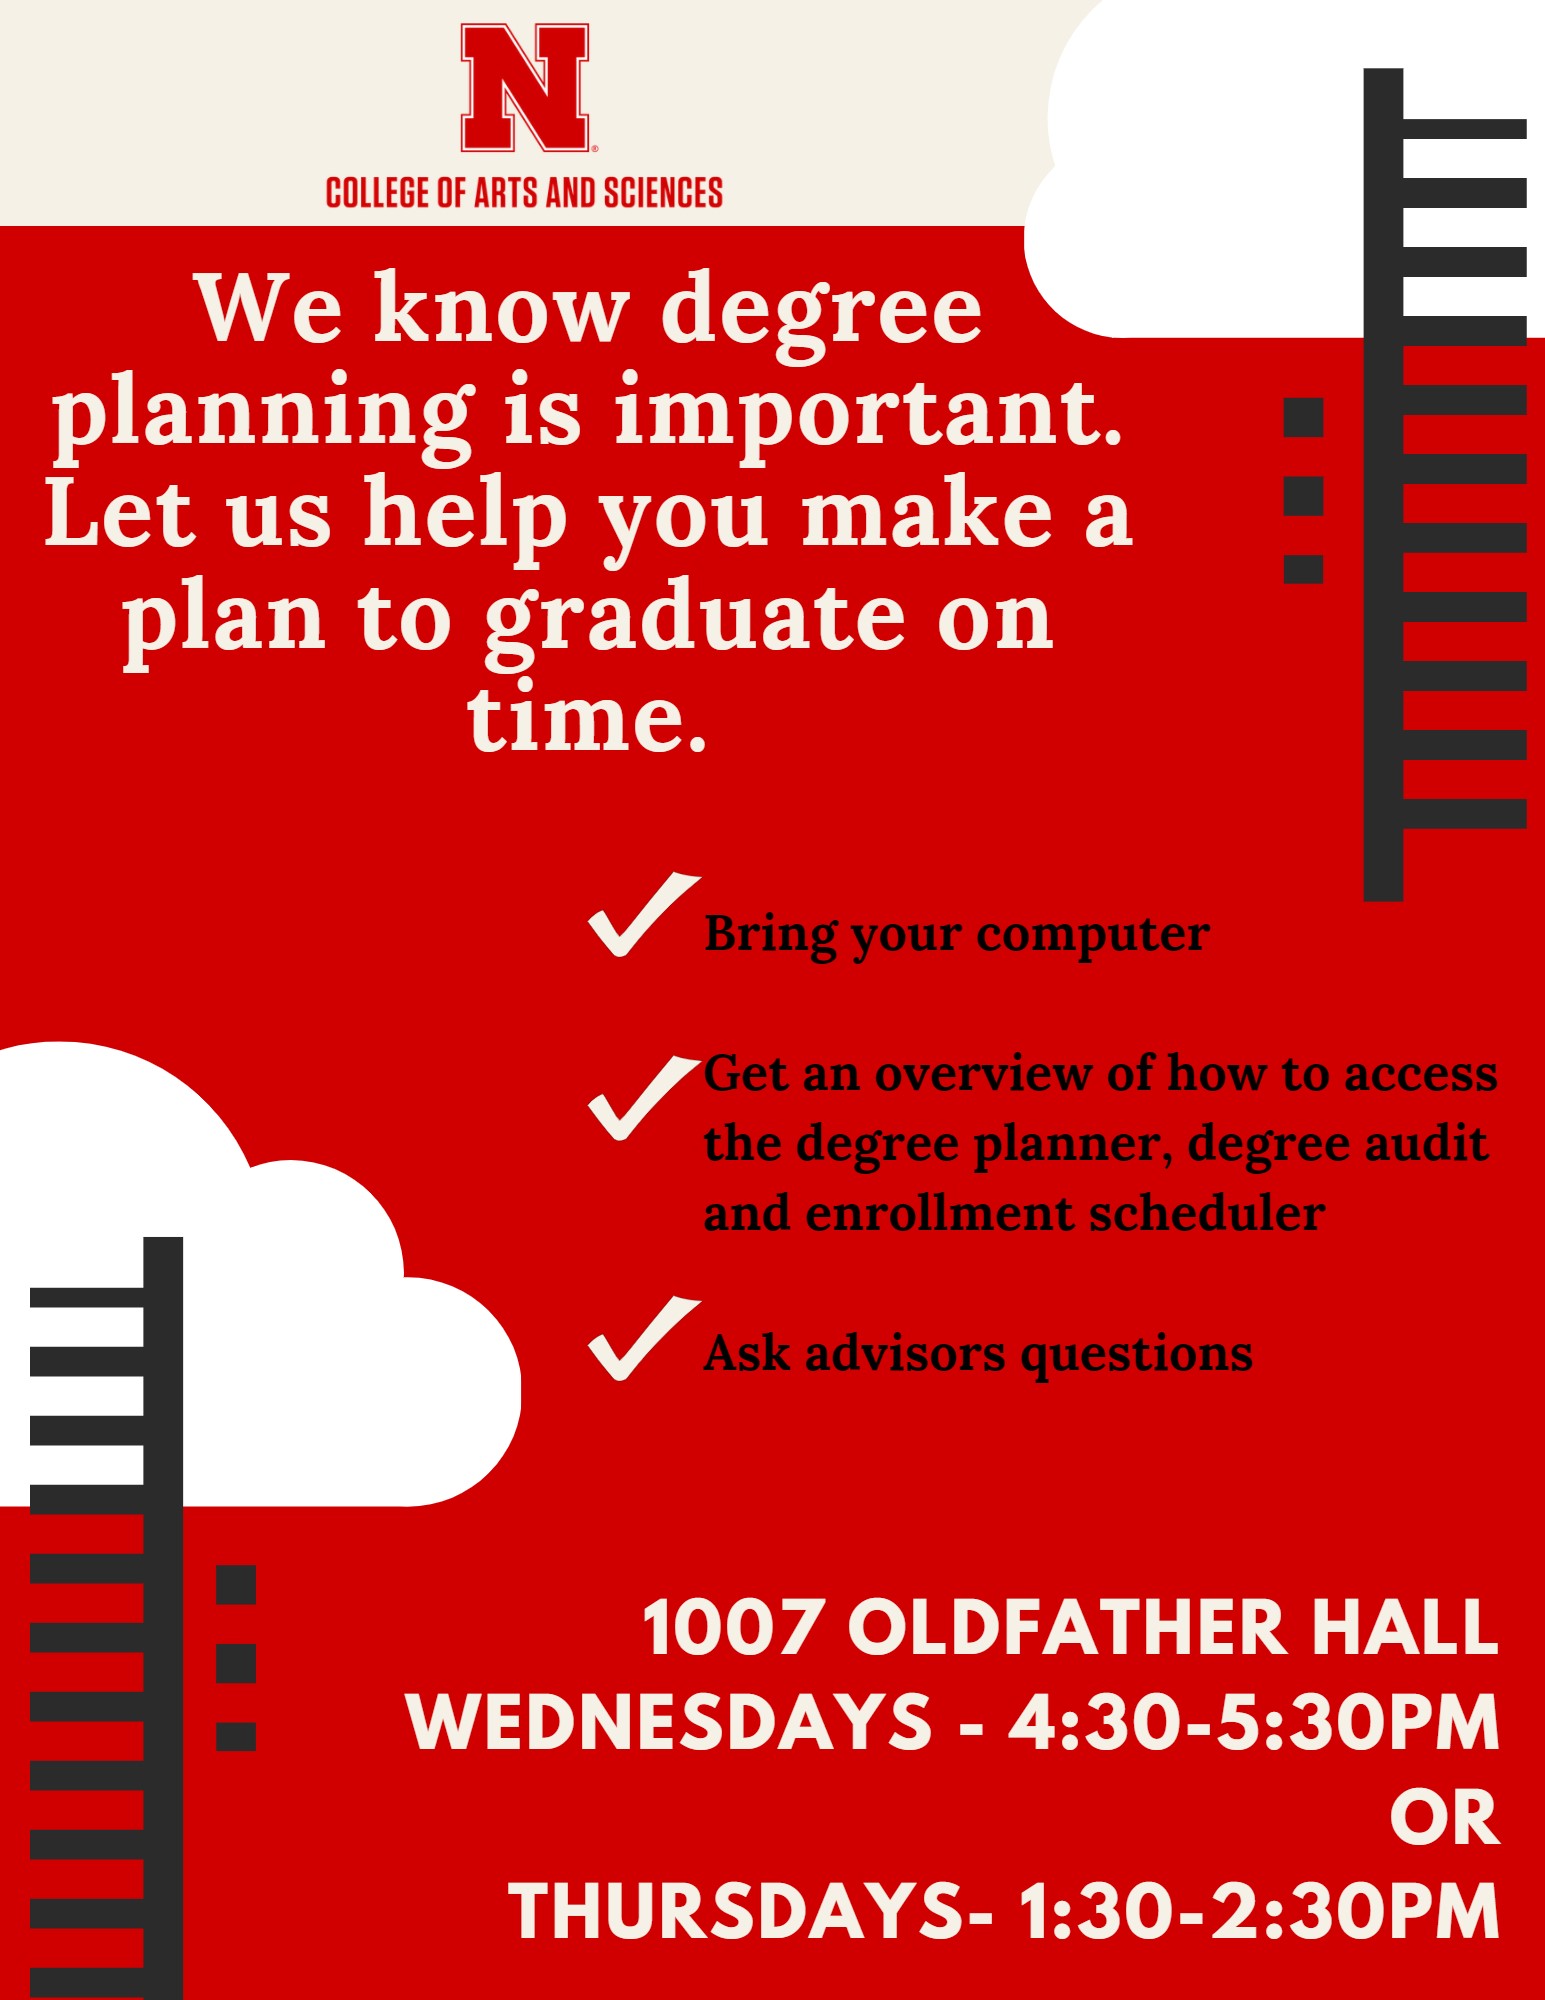 Stop By To Get Help With Degree Planning